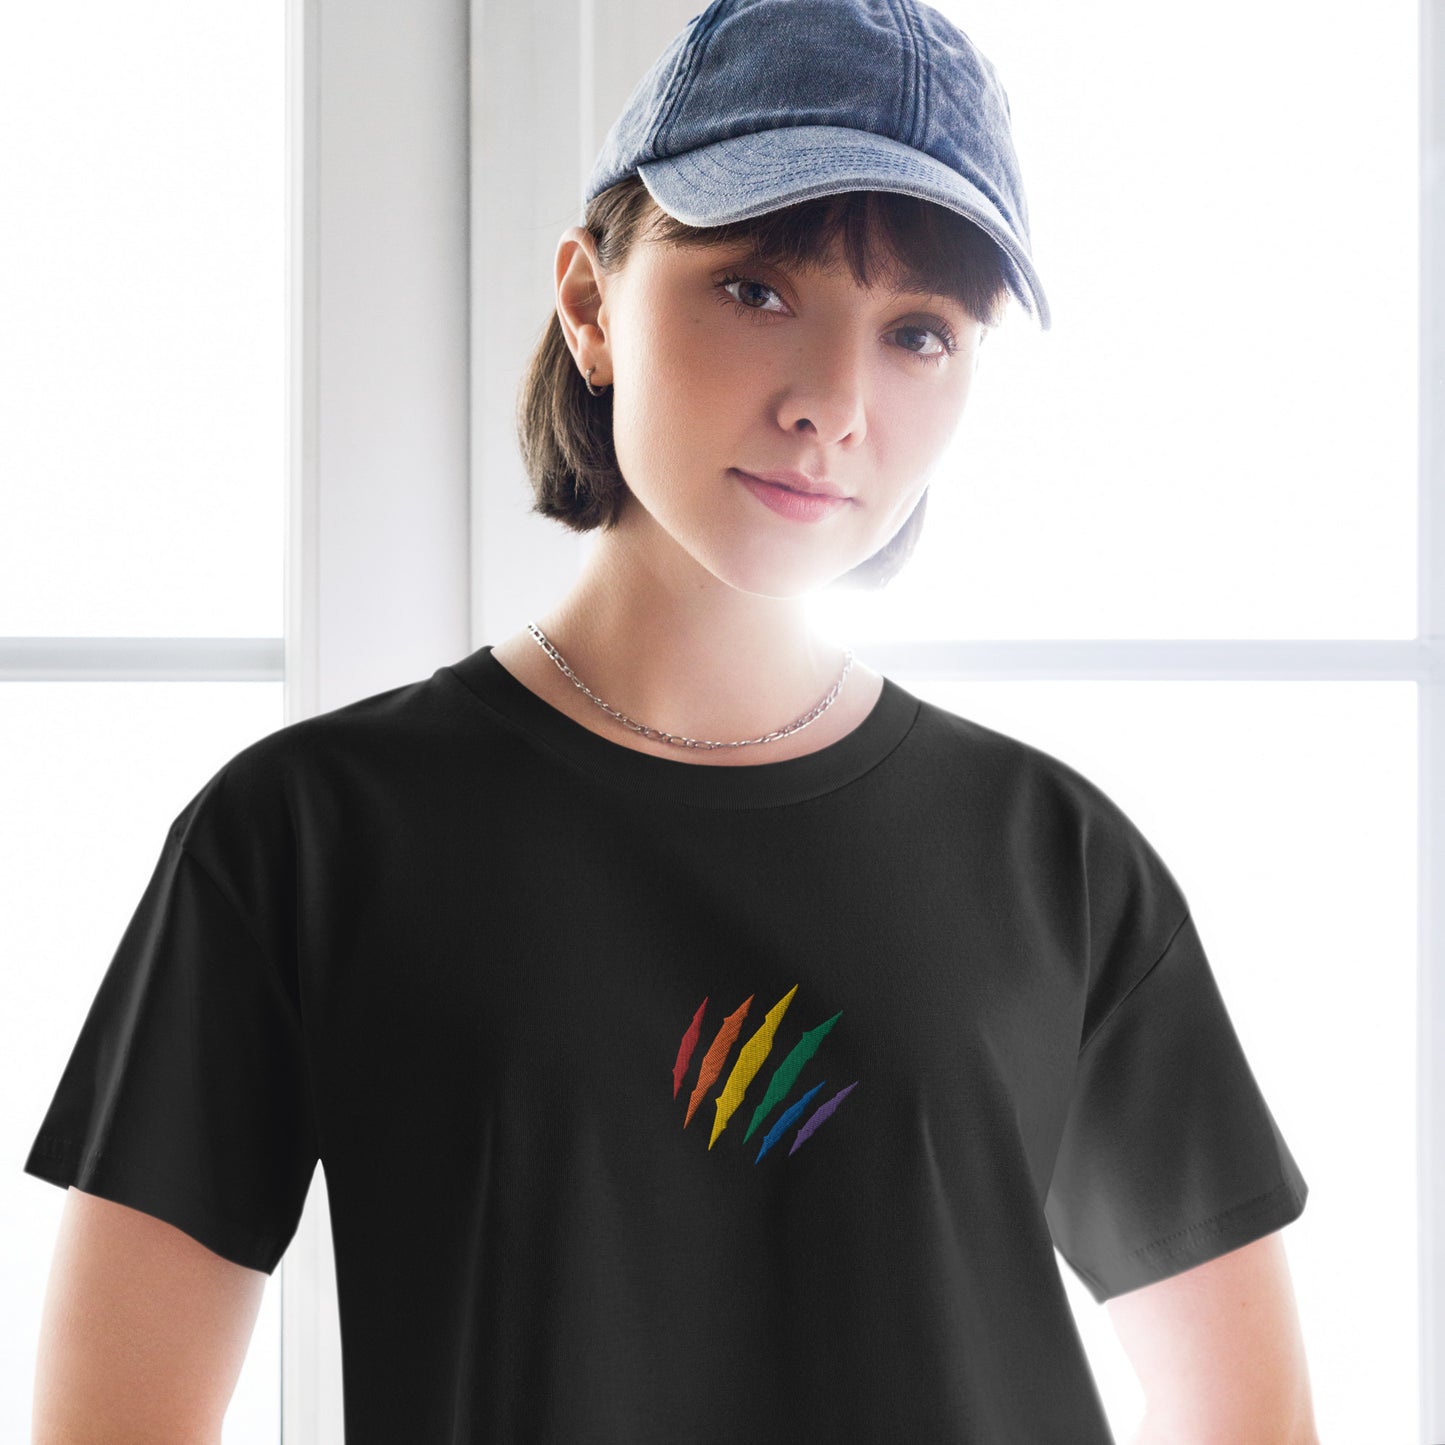 A female model wearing a relaxed, modest black crop top features a subtle rainbow mark embroidery. Adding a touch of rainbow to your look—a playful celebration of lgbtq culture! Made from 100% combed cotton. Available in Extra Small, Small, Medium, Large, Extra Large.